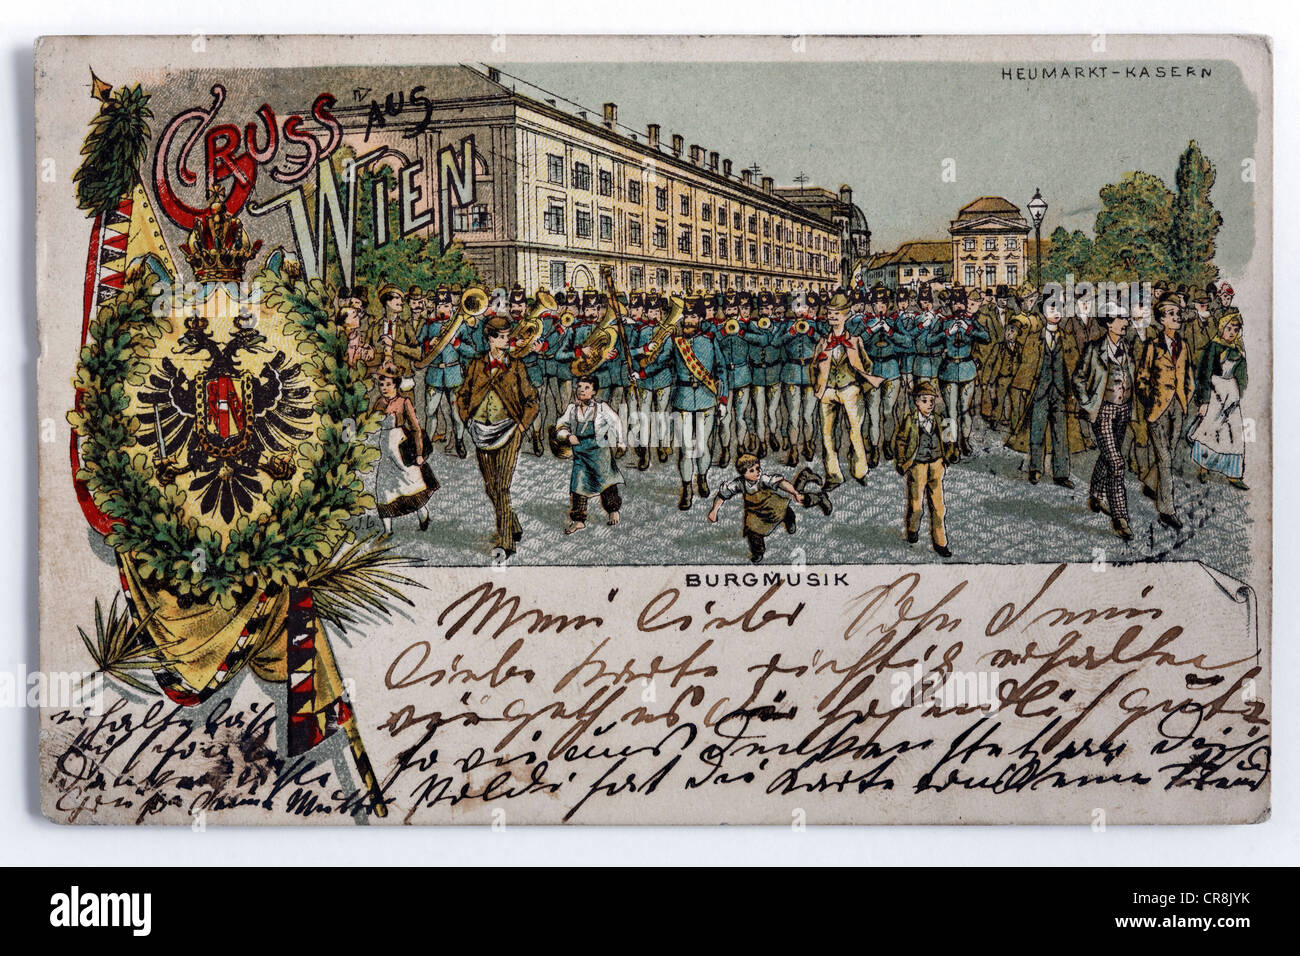 Greetings from Vienna, military band marching in front of Heumarkt barracks, Vienna, Austria, historical postcard Stock Photo